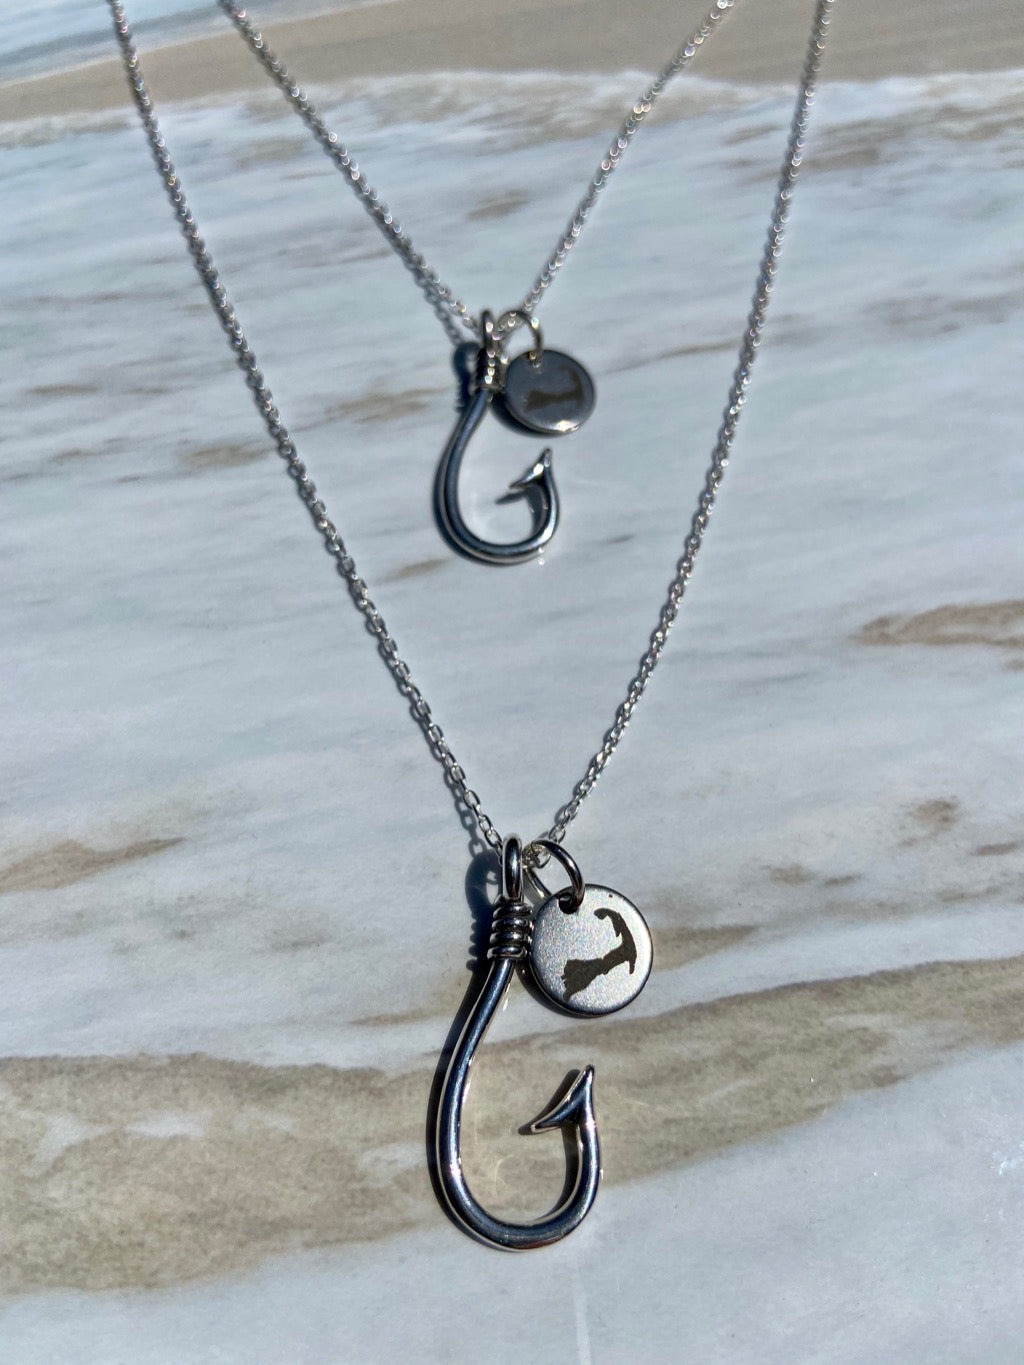 Cape Cod Girl Hook Necklace